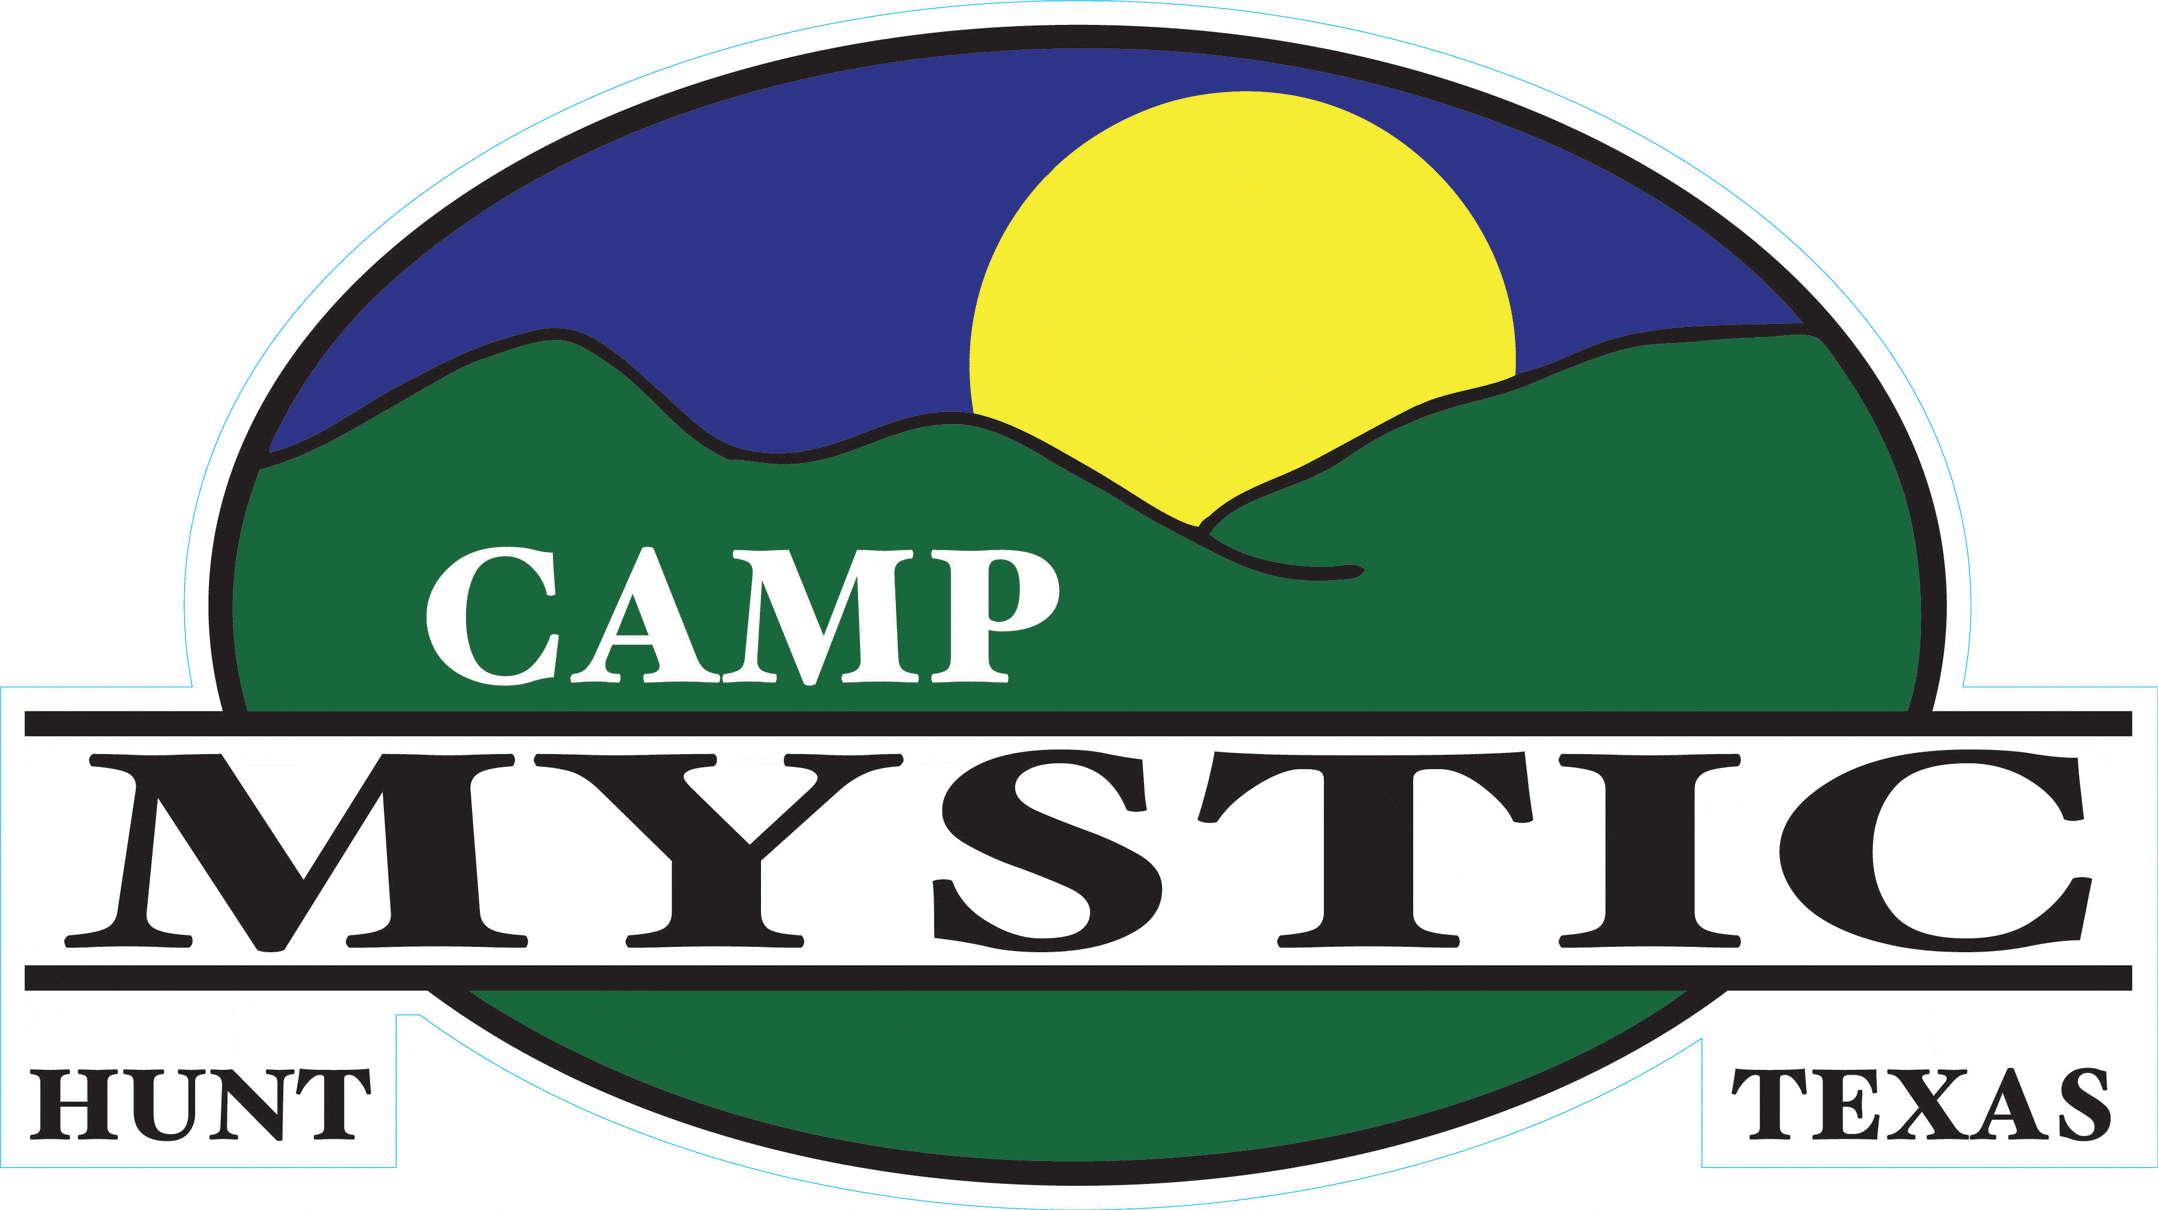 Apply your Camp Mystic Logo Decal on your Camp Trunk!